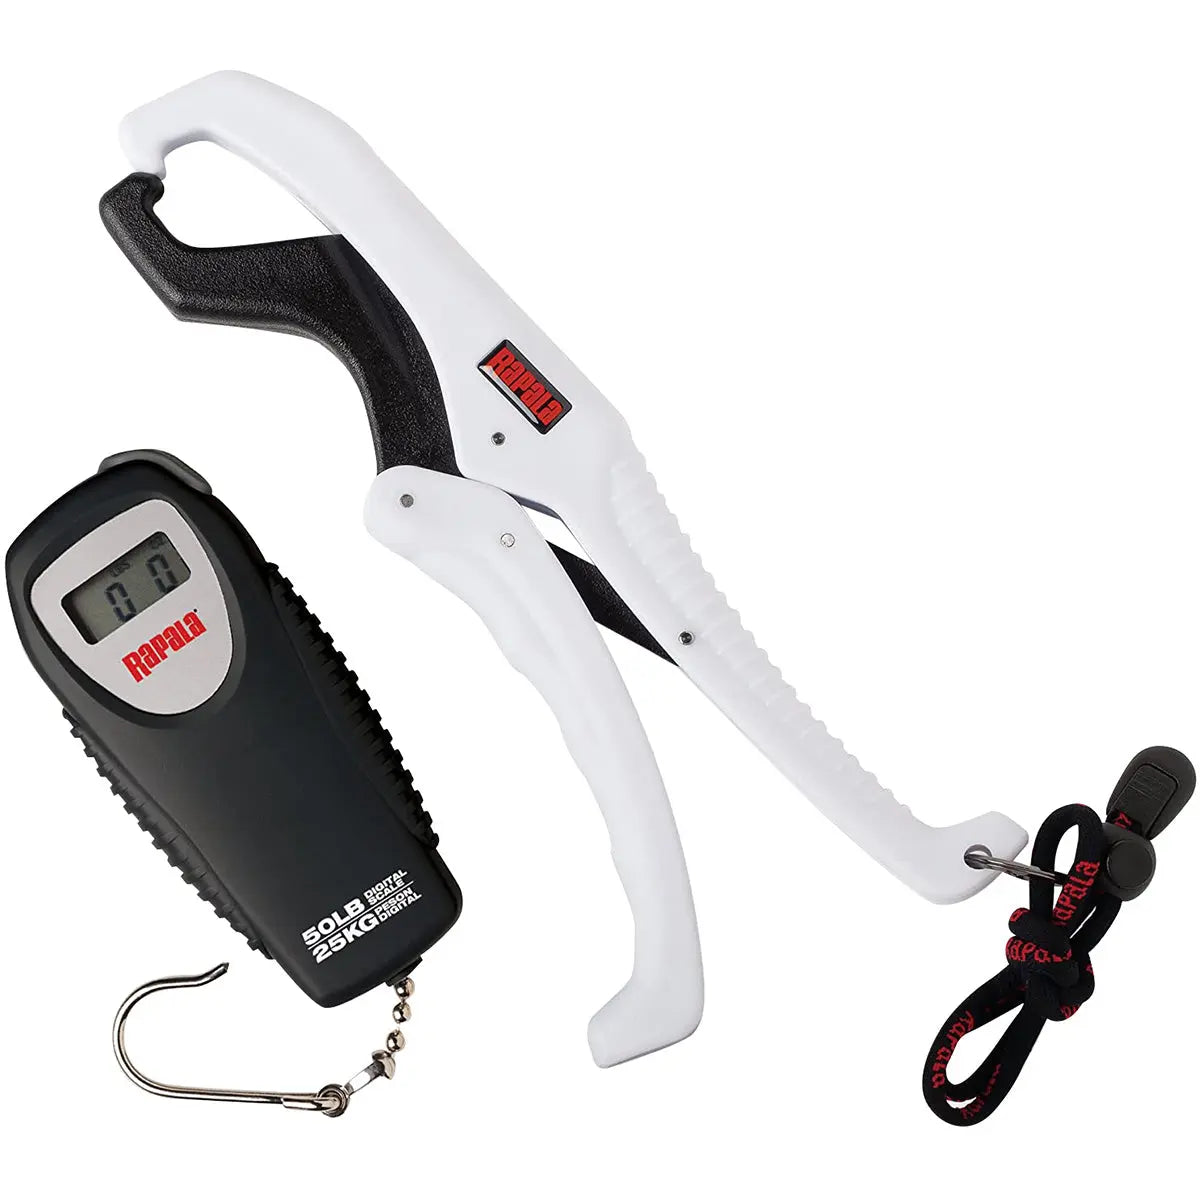 Rapala Floating Fish Gripper and Scale Combo Pack - Black/White Rapala